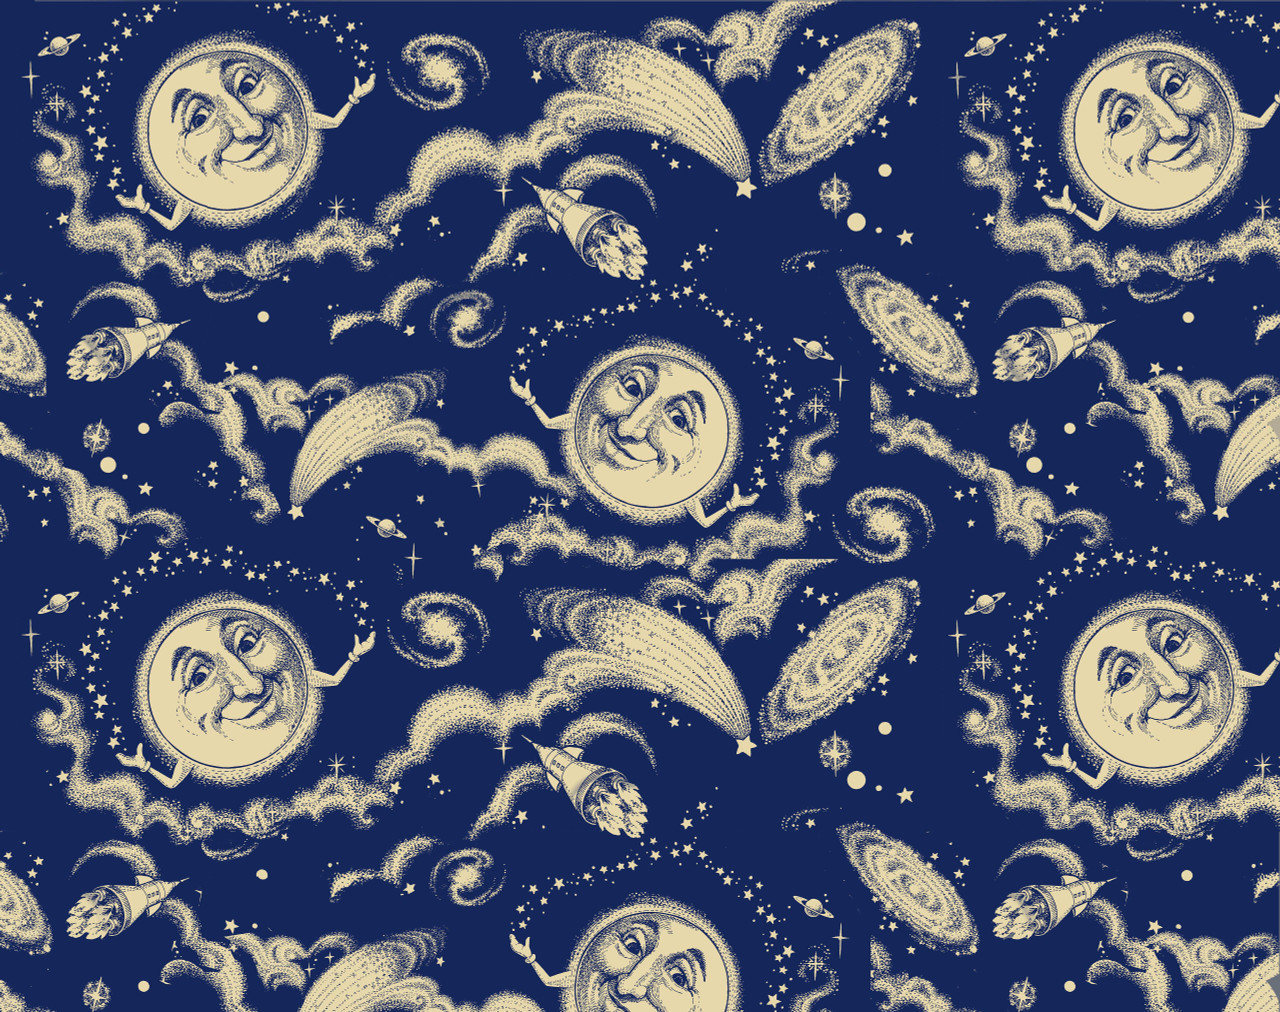 Old Farmers Almanac Cotton Fabric Collection by Sykel-OFA Celestial Moon in Sky